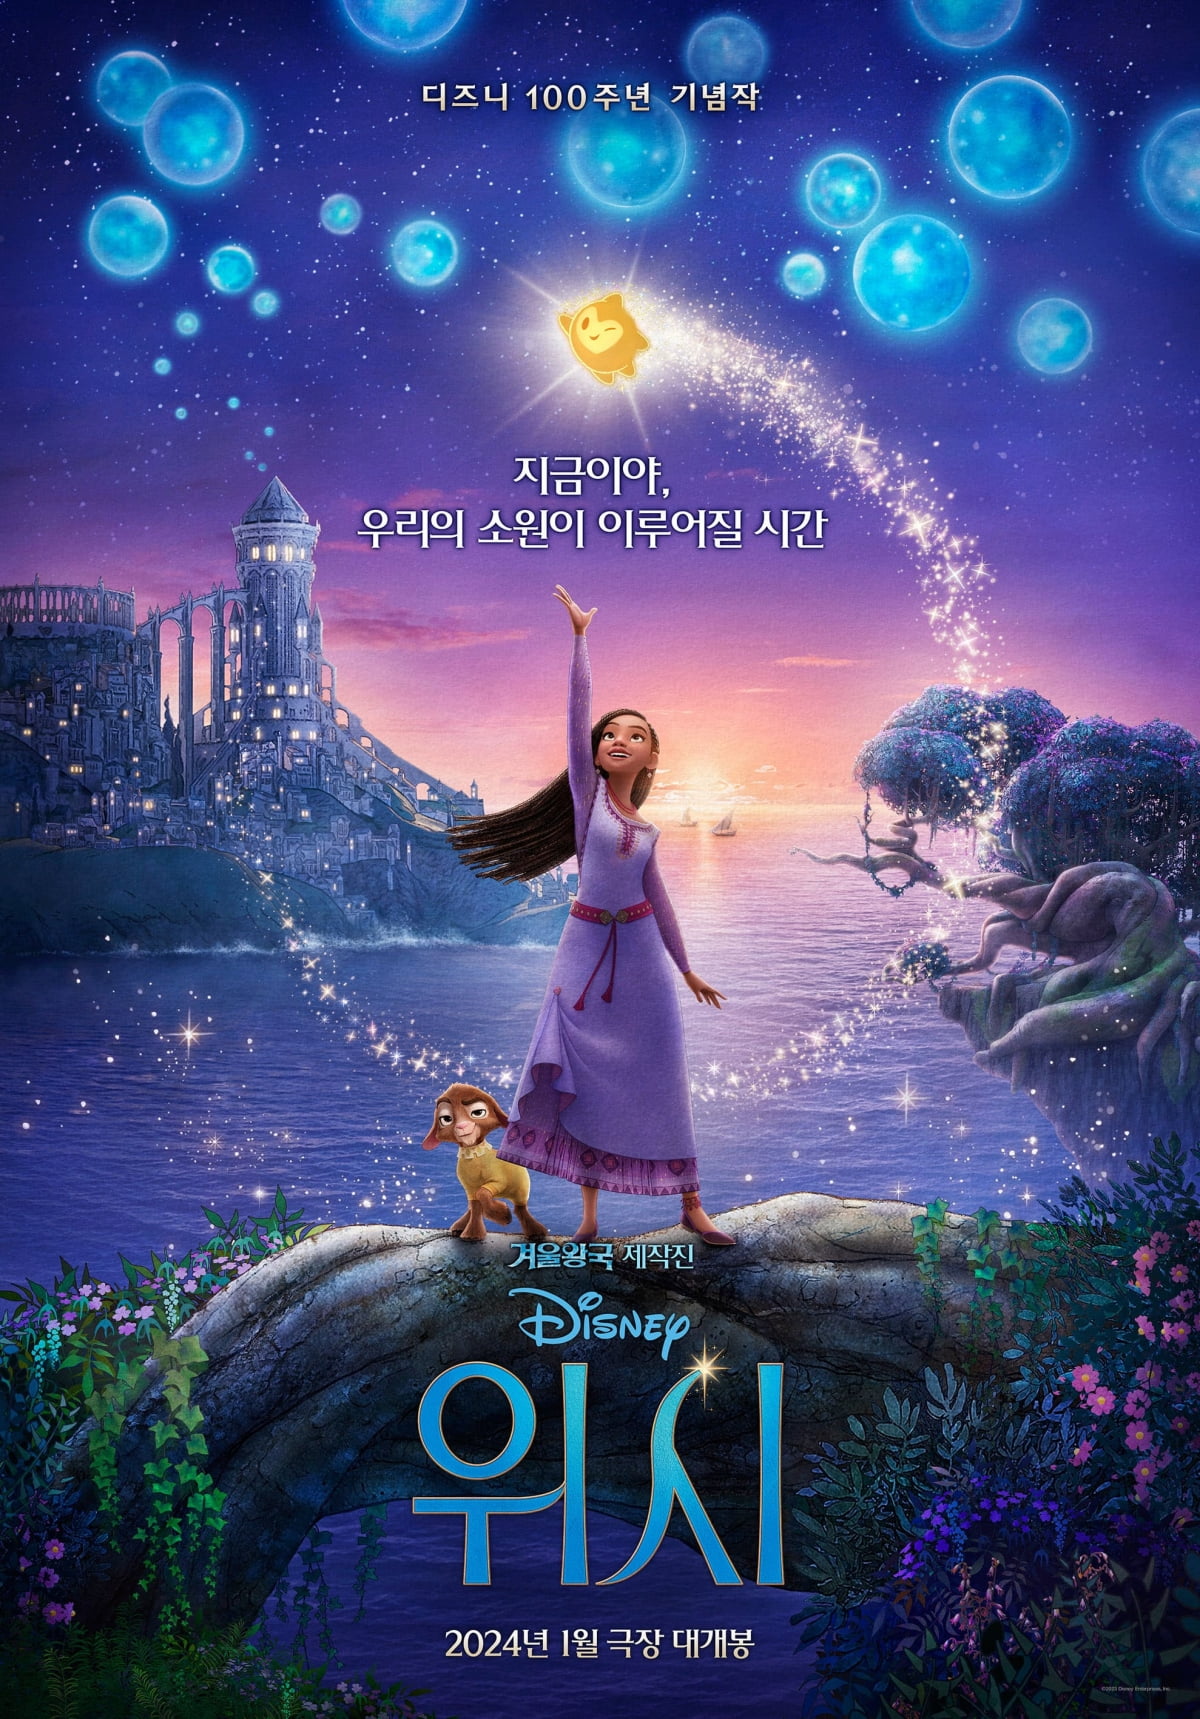 Disney's 100th anniversary commemorative film 'Wish', the special journey of courageous girl Asha